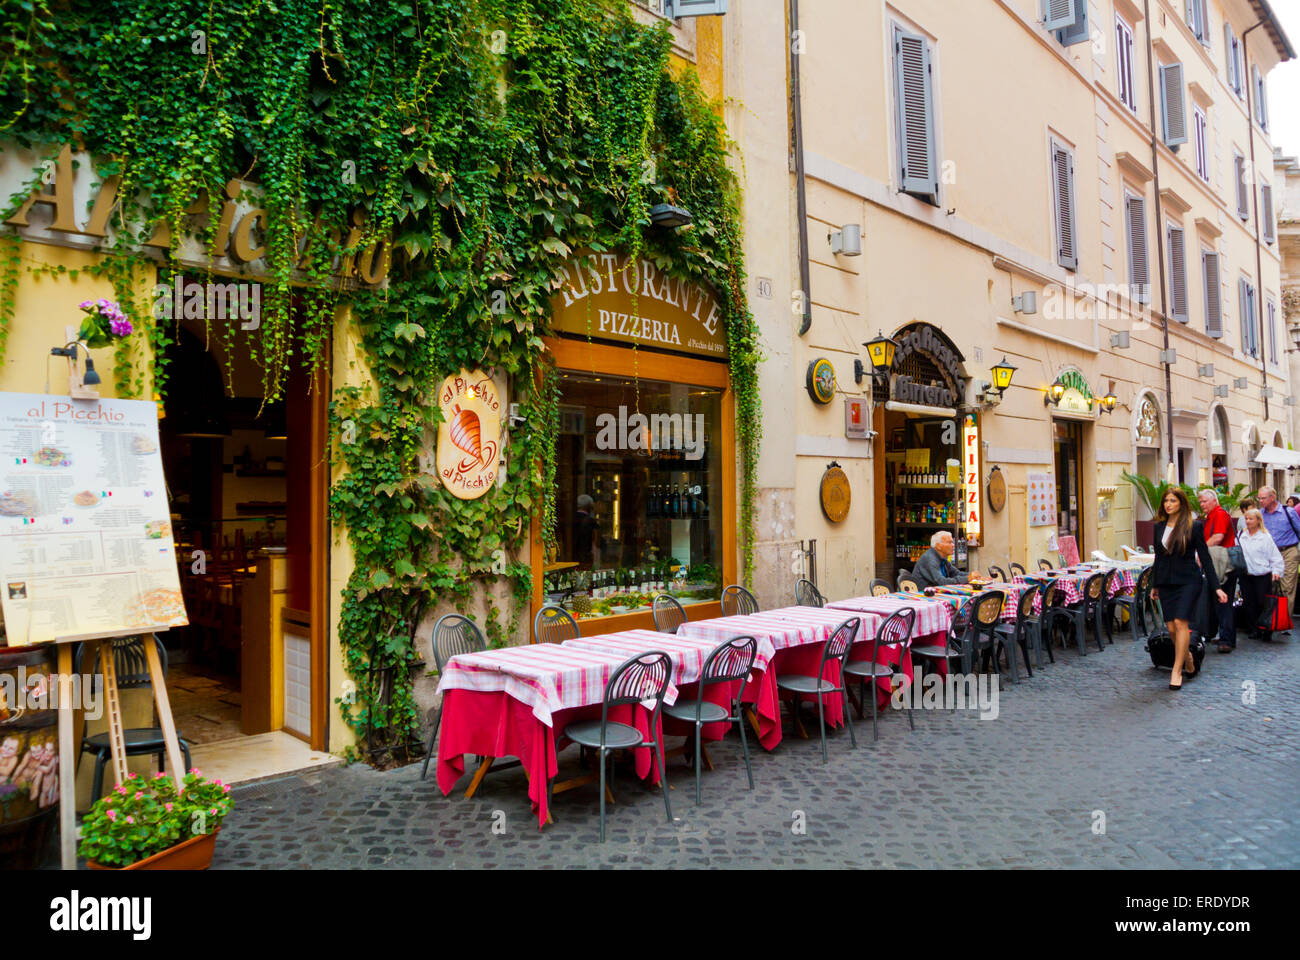 Restaurant, Centro storico, old town, central Rome, Italy Stock Photo